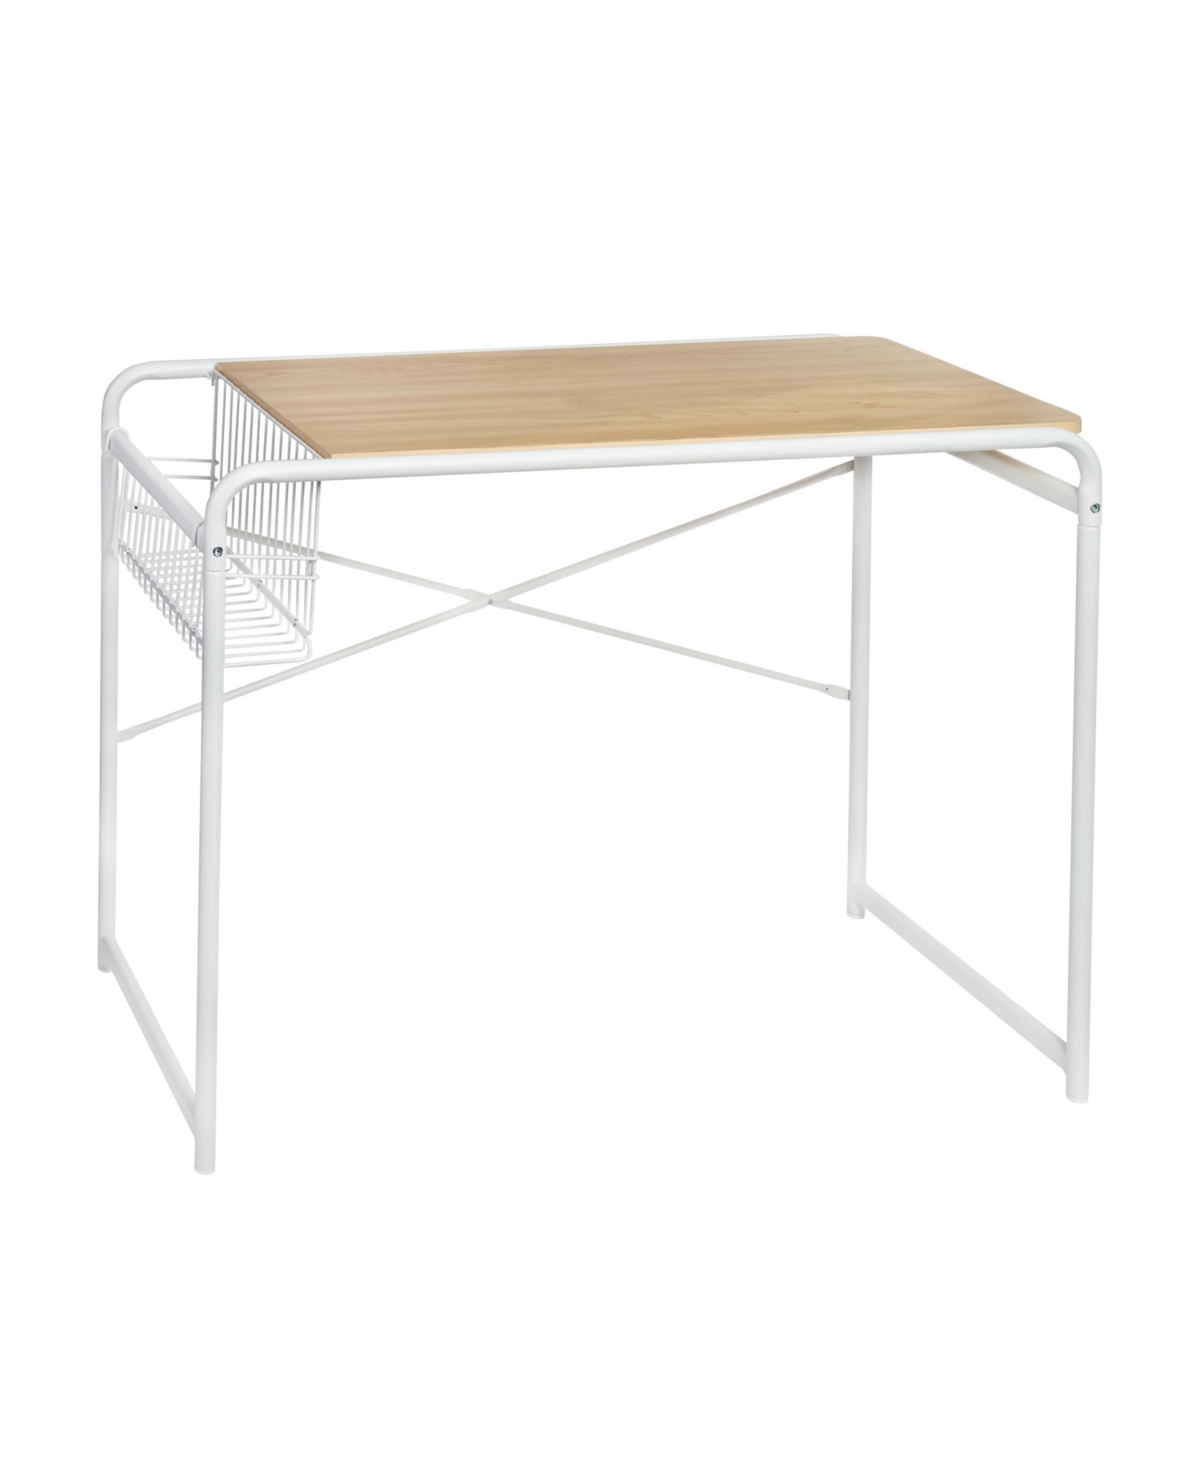 Home Office Computer Desk with Side Basket - White